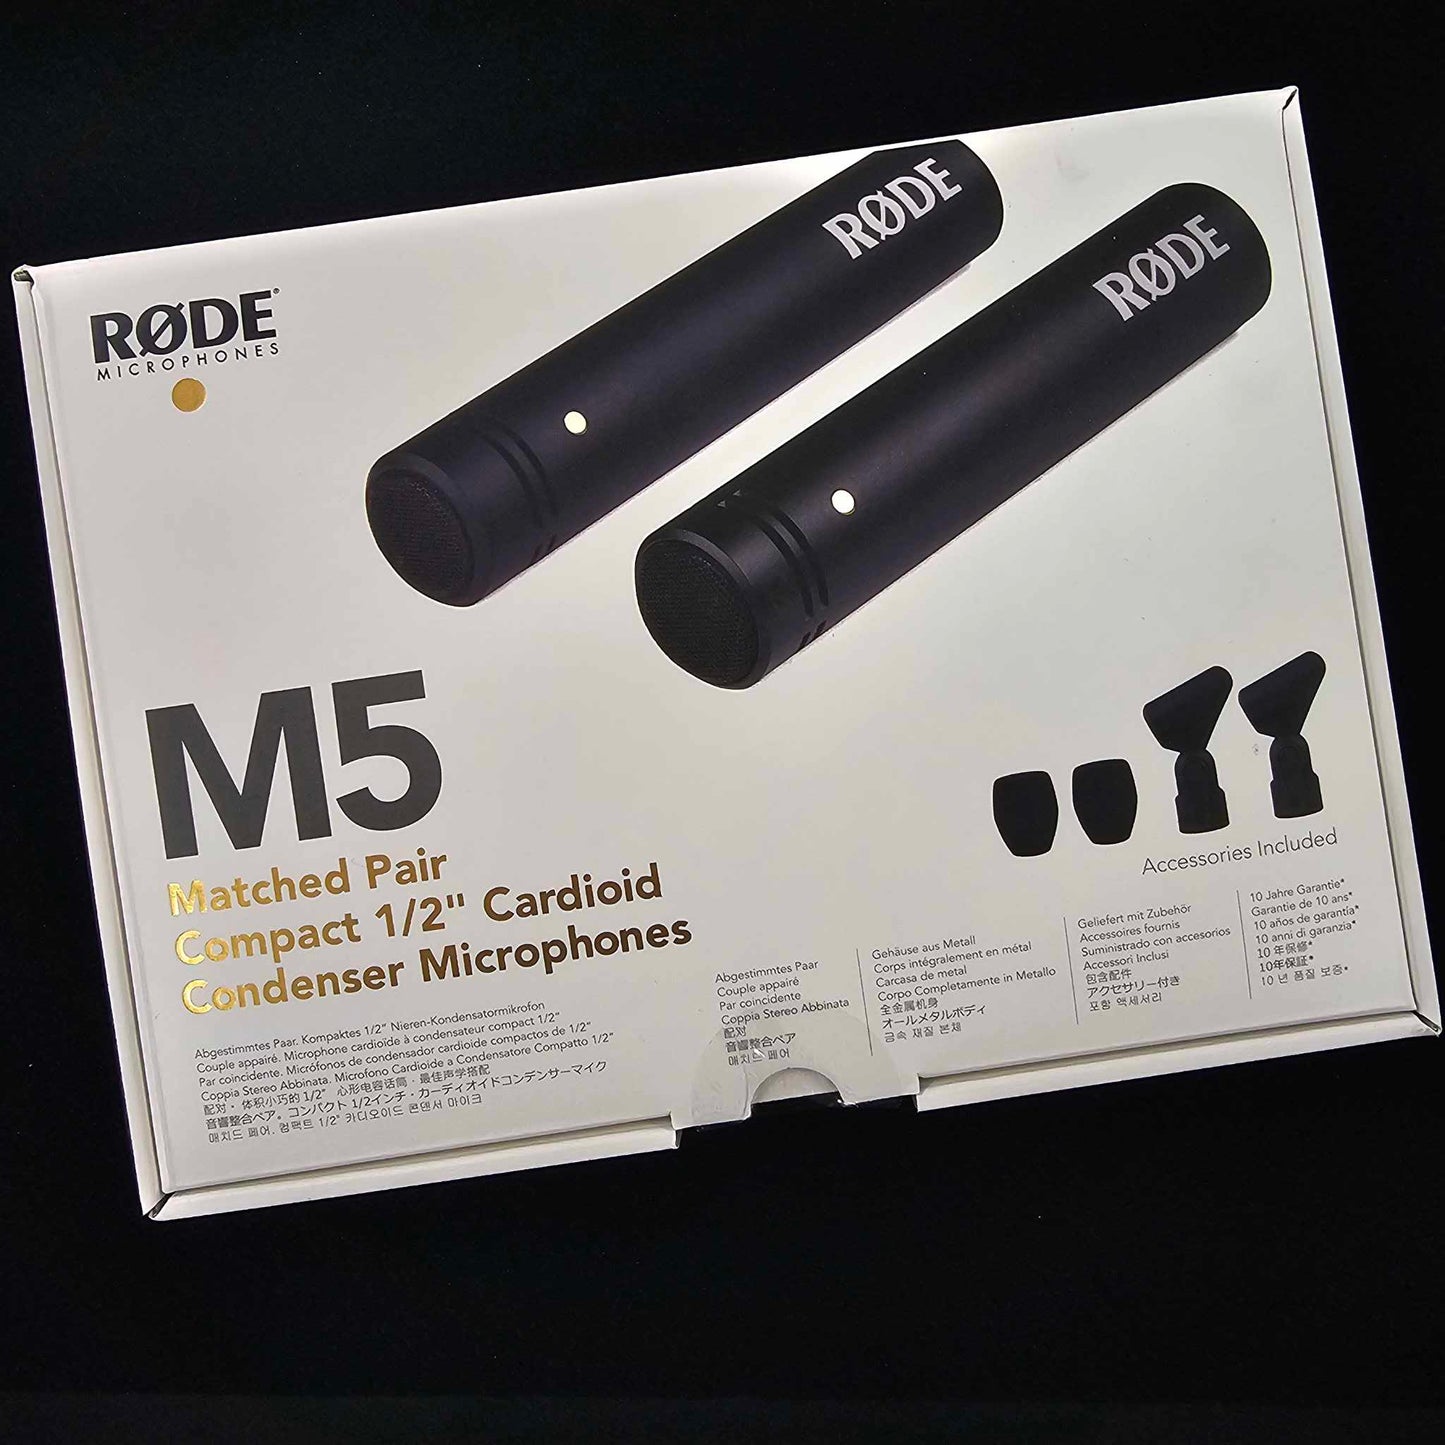 Rode M5 Matched Pair Compact 1/2" Cardoid Pencil Condenser Microphones